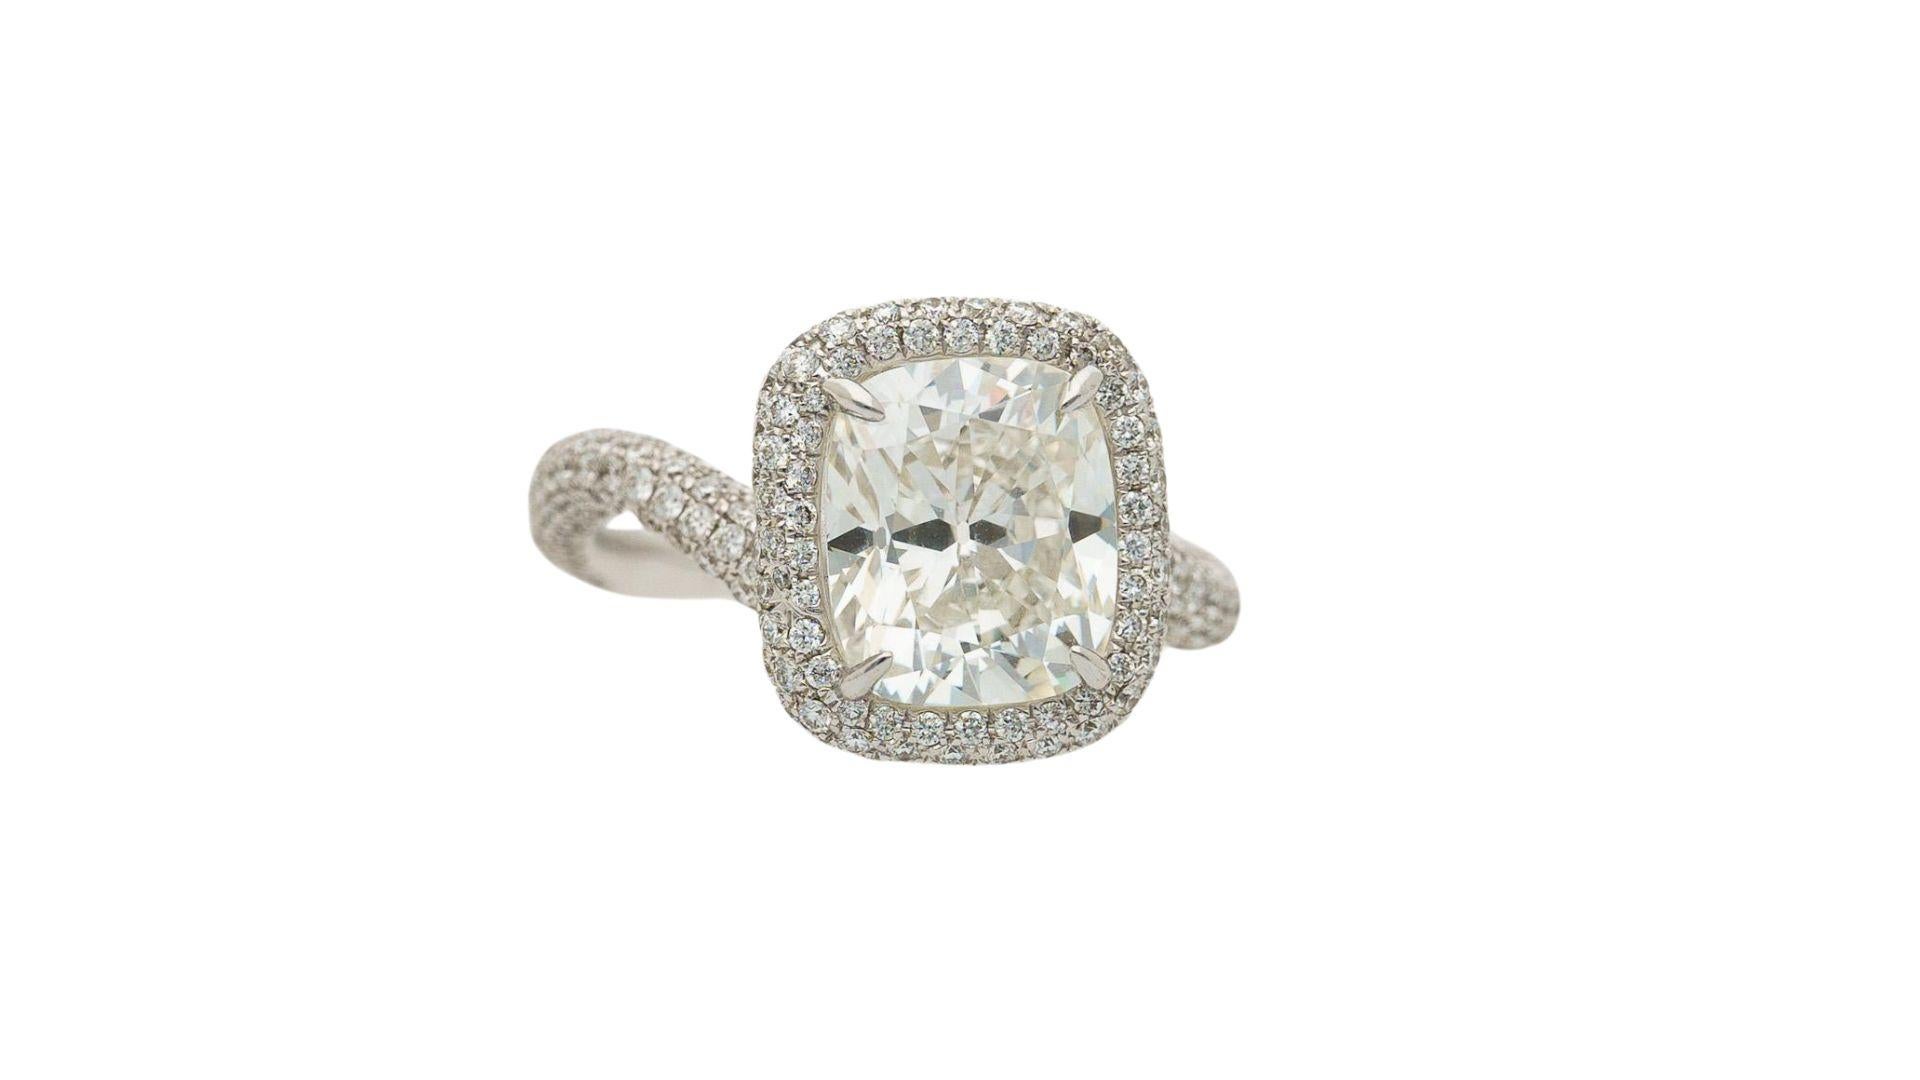 GIA Certified 4 Carat Cushion Cut H/VS1 Diamond Engagement Ring in 18K White Gold. 

GIA certified natural white diamond center stone with a cushion brilliant cut. Adorned with additional round-cut 1.43-carat white diamond side detailing along the